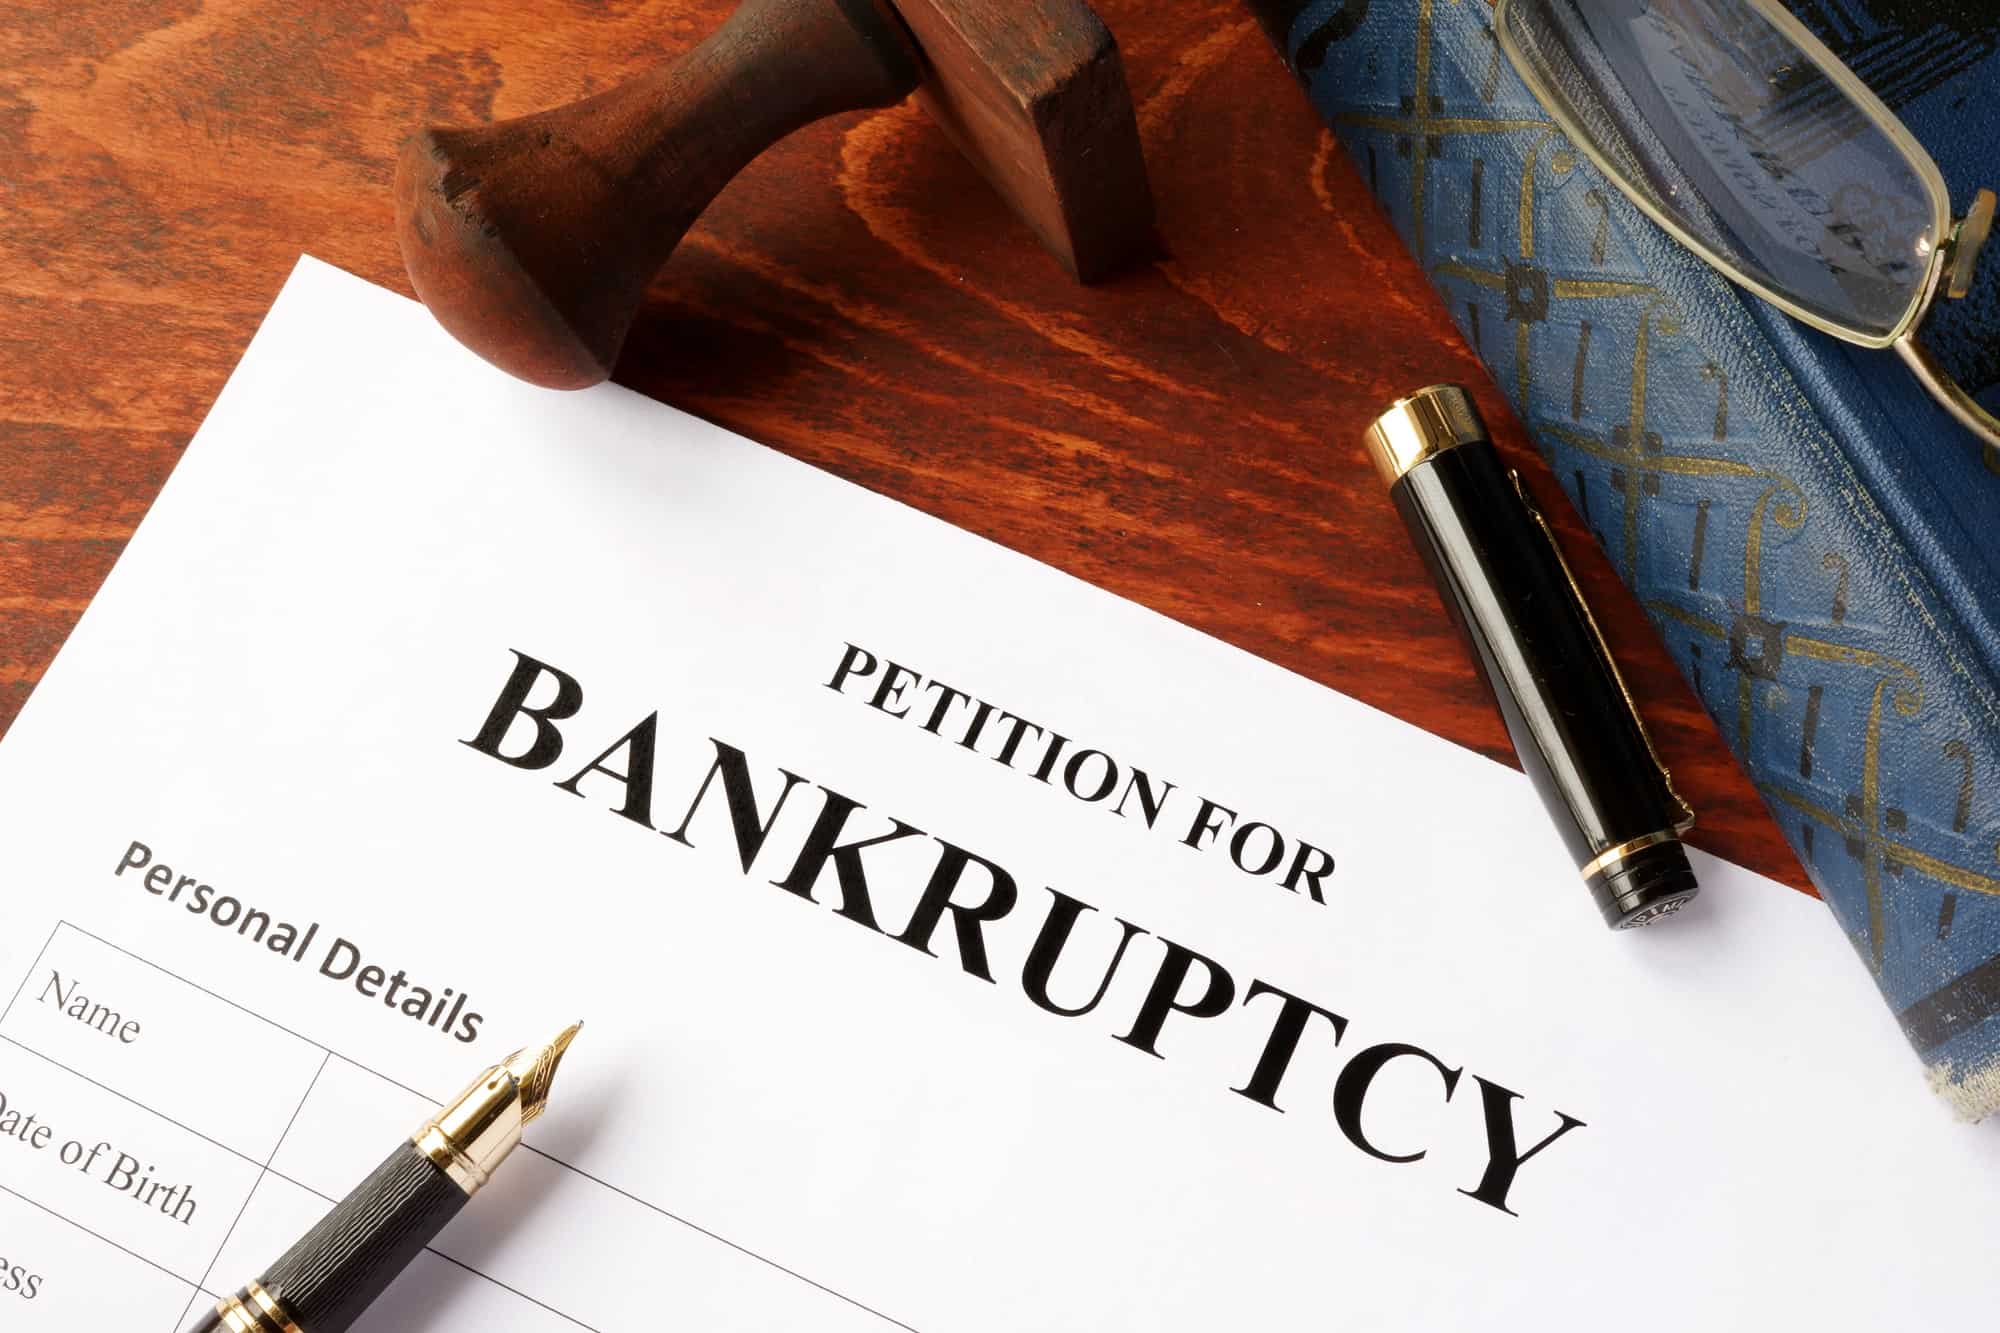 Need help with a Bankruptcy Situation?